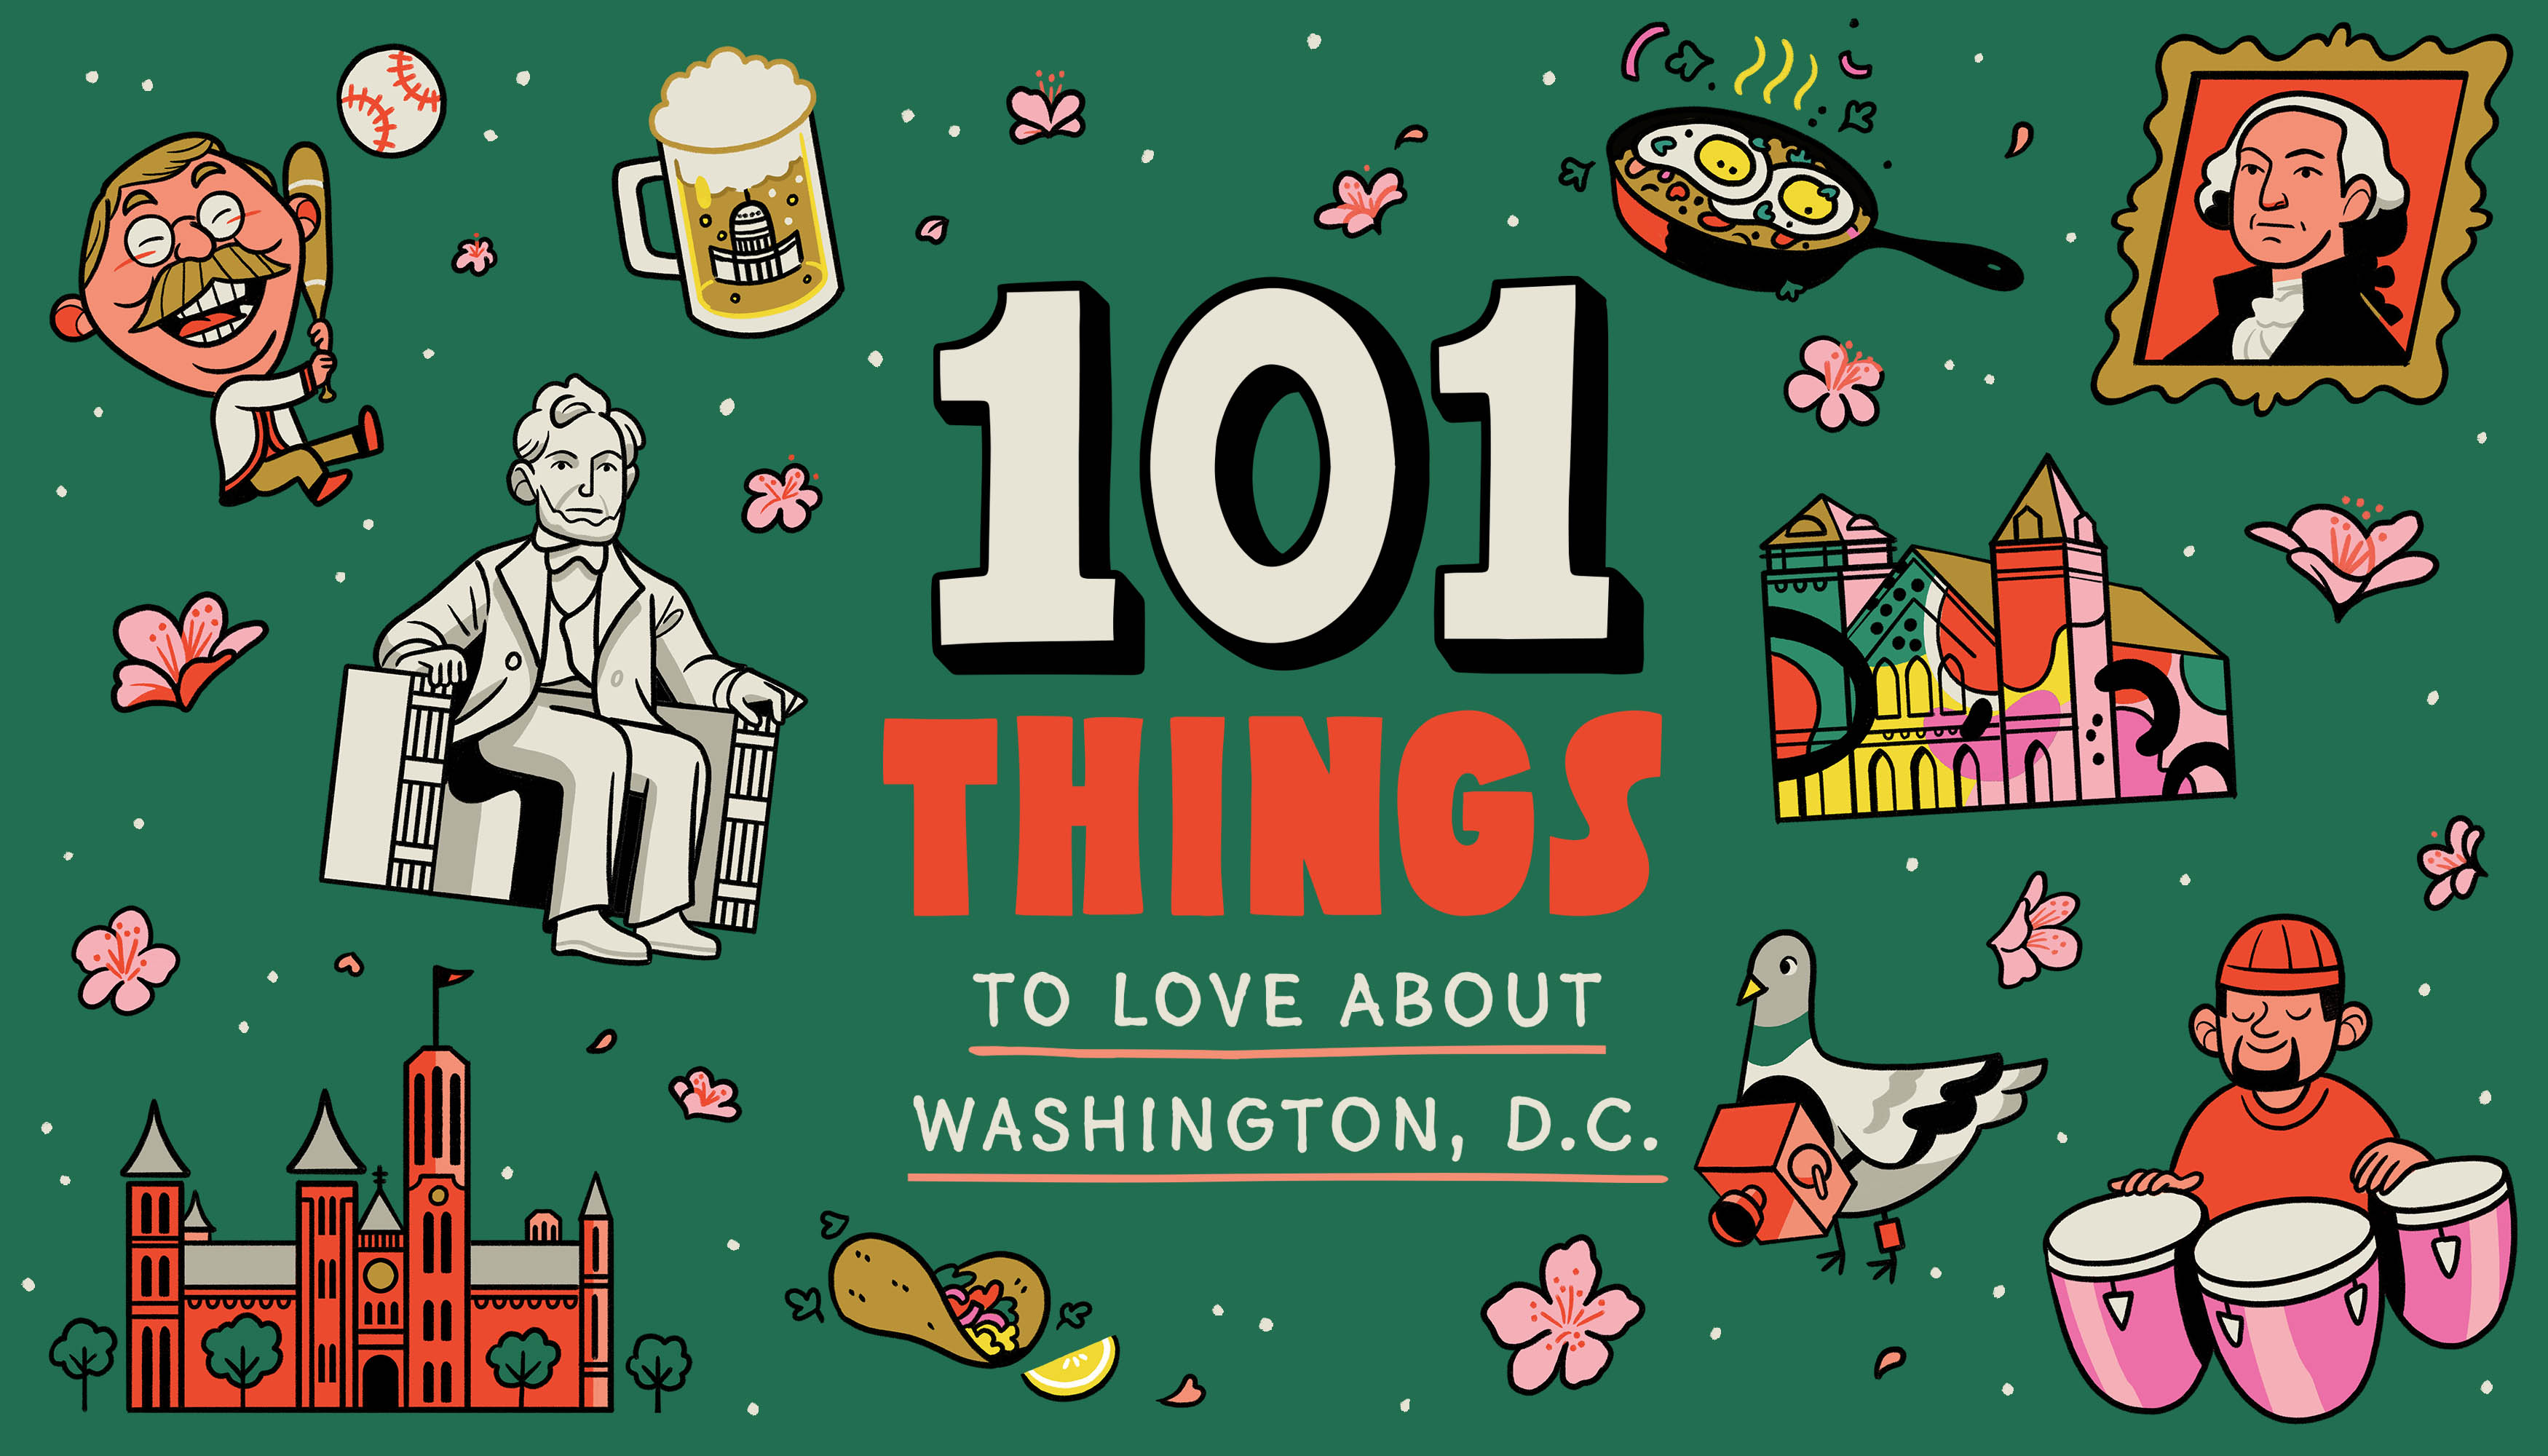 An illustration with a dark green background and icons of Washington, D.C., including the Abraham Lincoln statue, the Smithsonian Castle, the Teddy Roosevelt Washington Nationals mascot, and a go-go drum player.